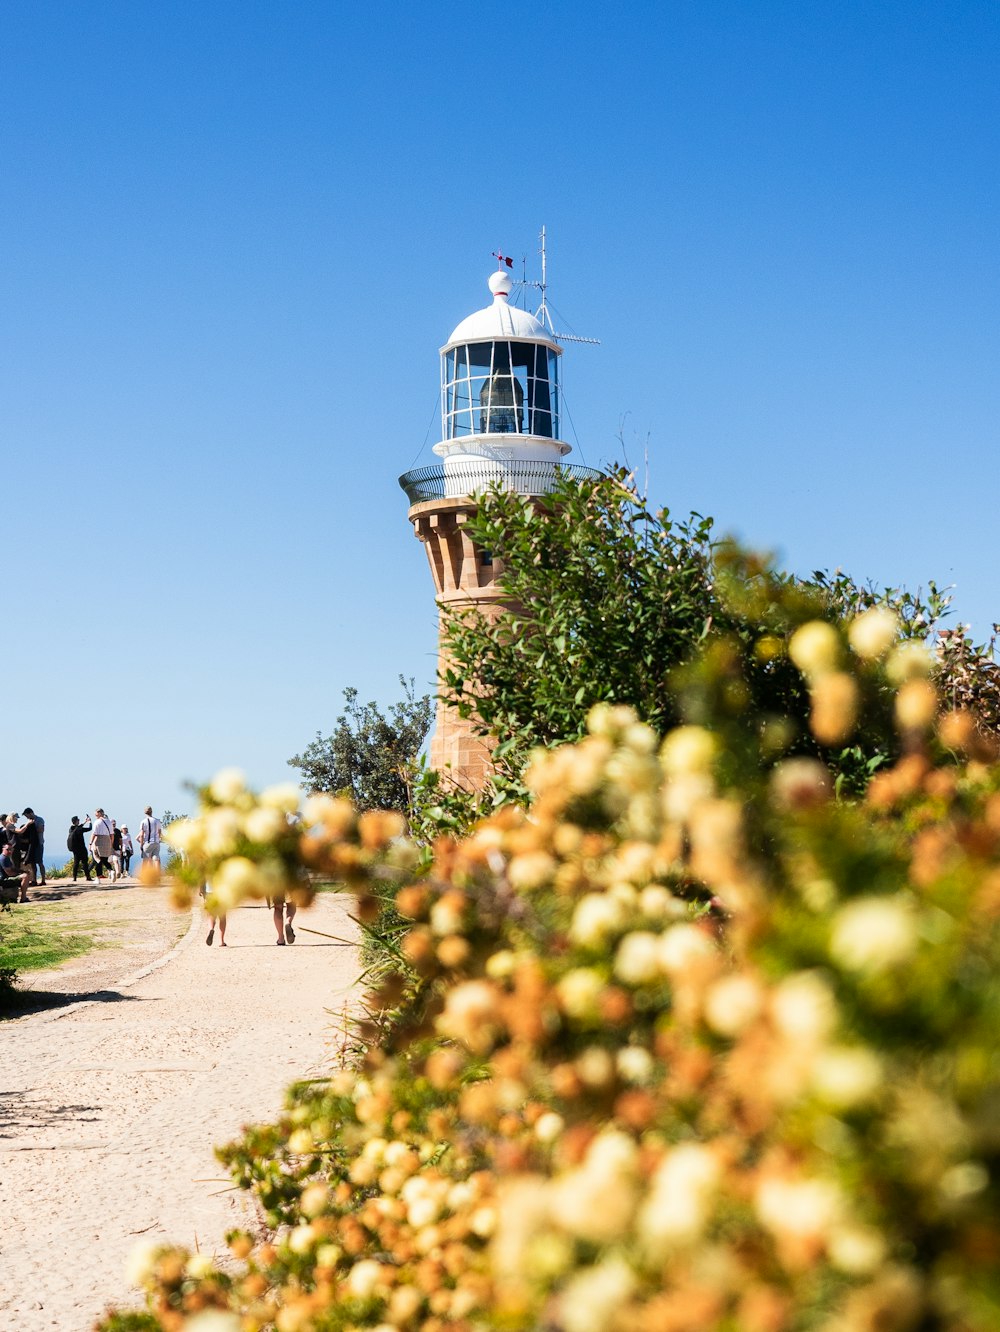 people walking near white and brown lighthouse under blue sky during daytime